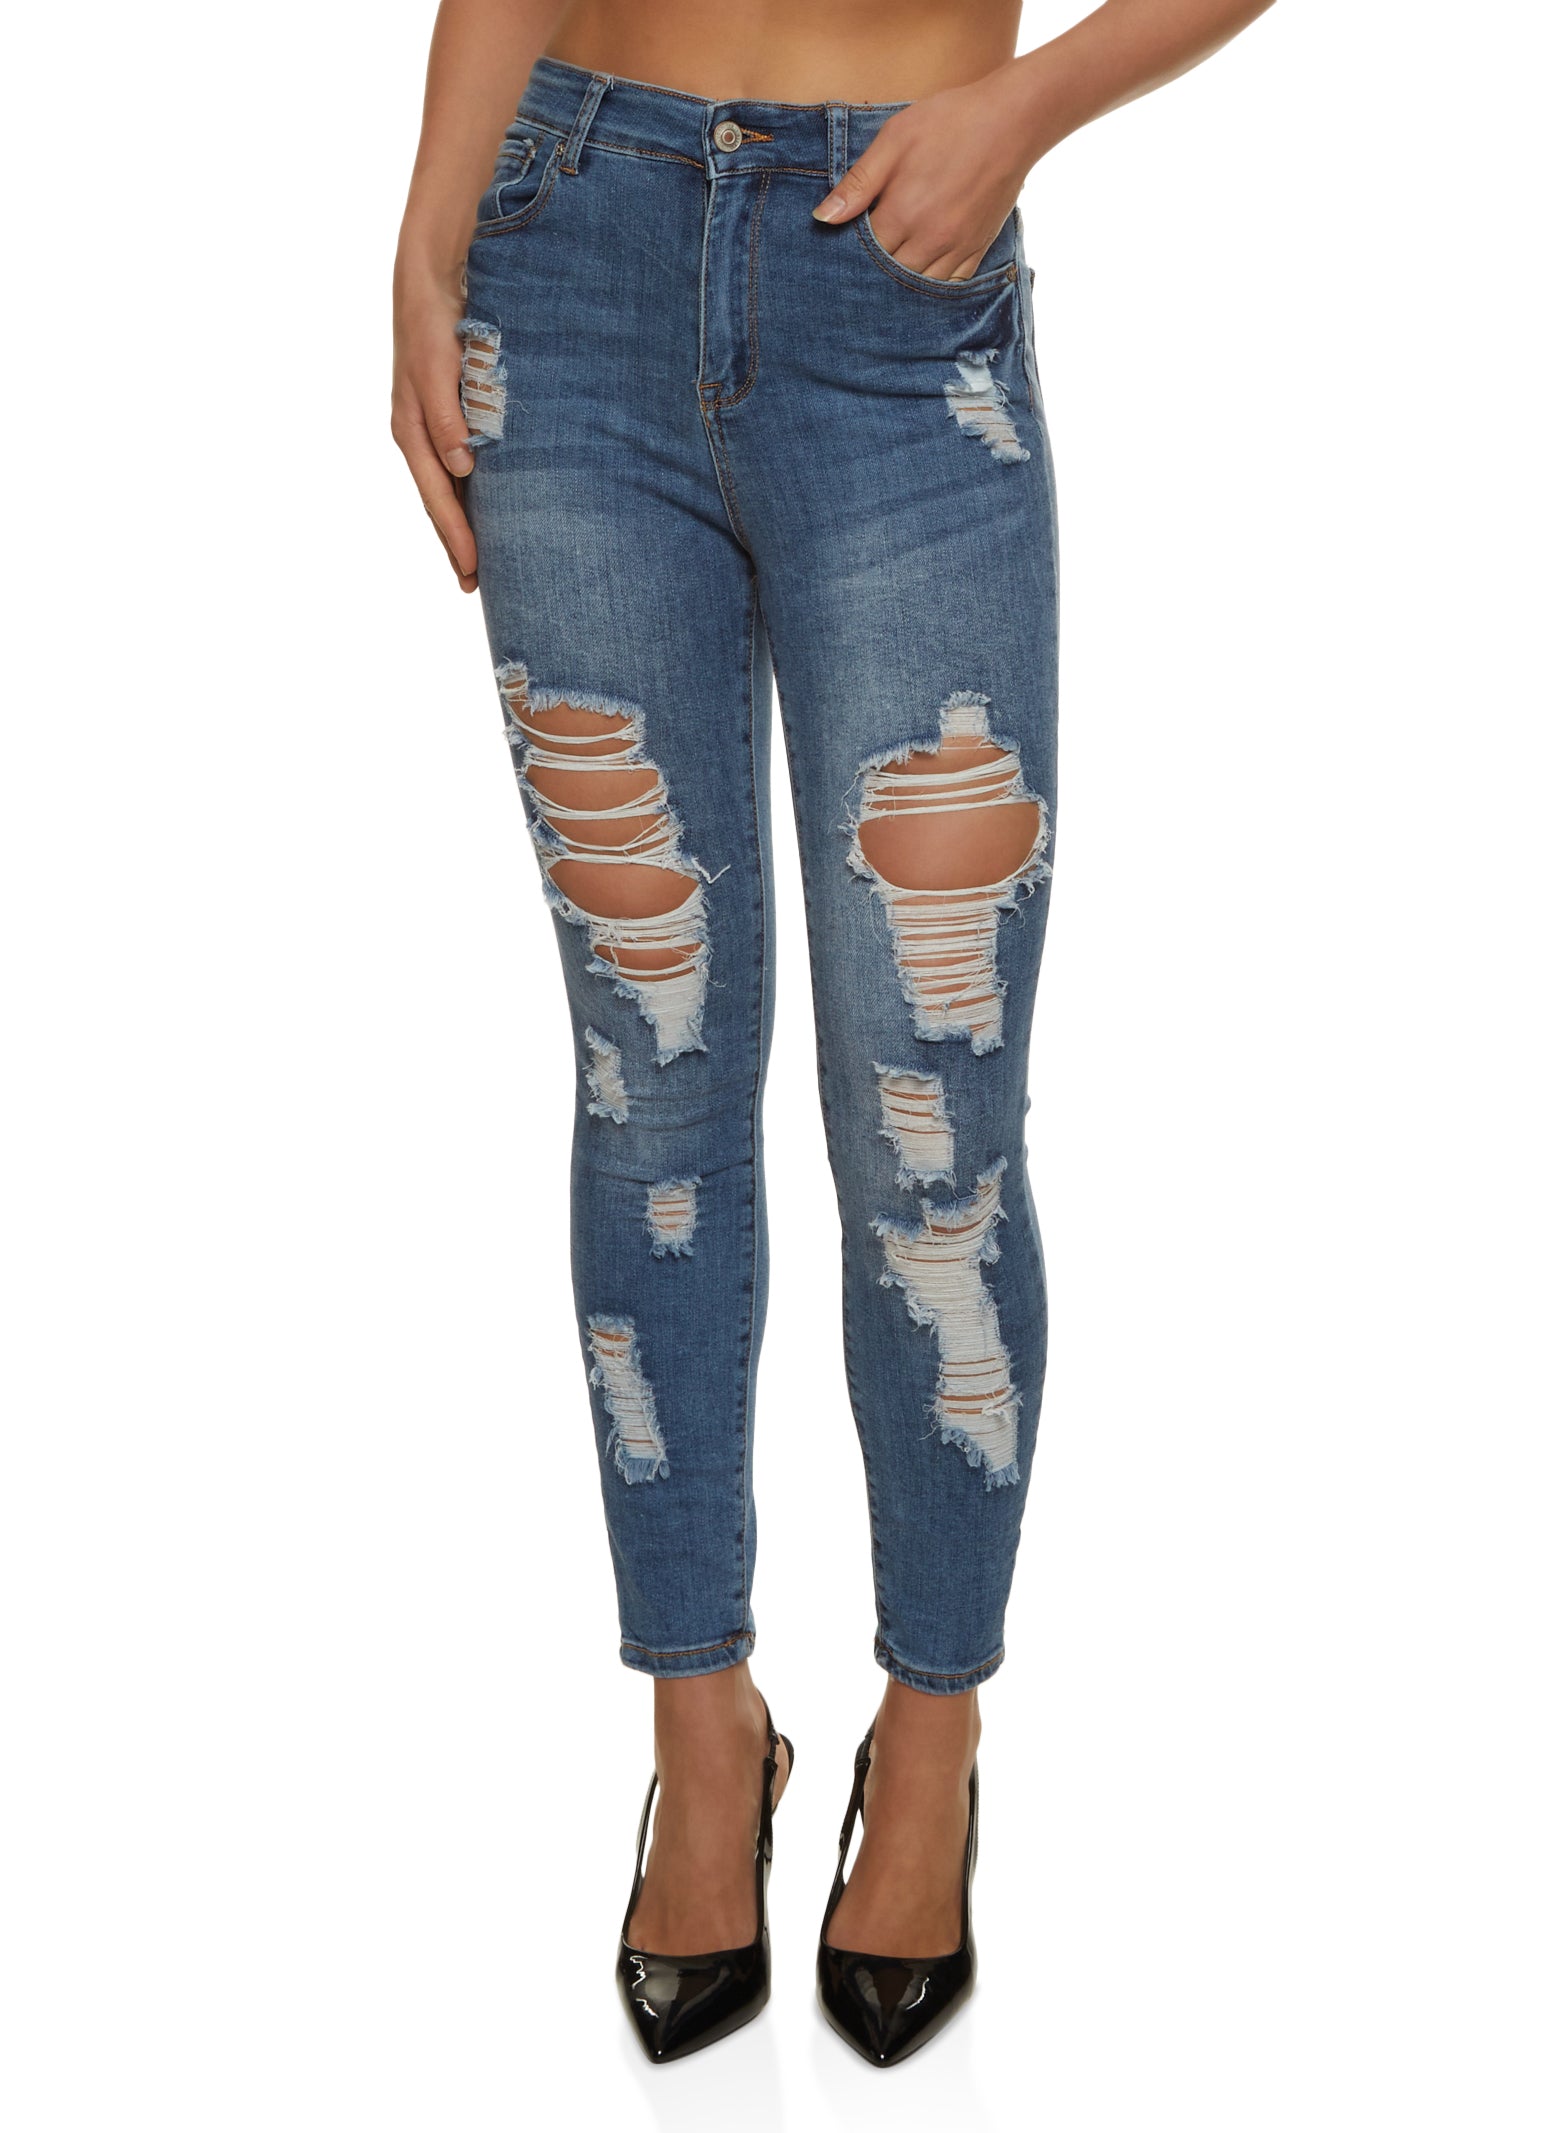 Ripped Jeans for Women